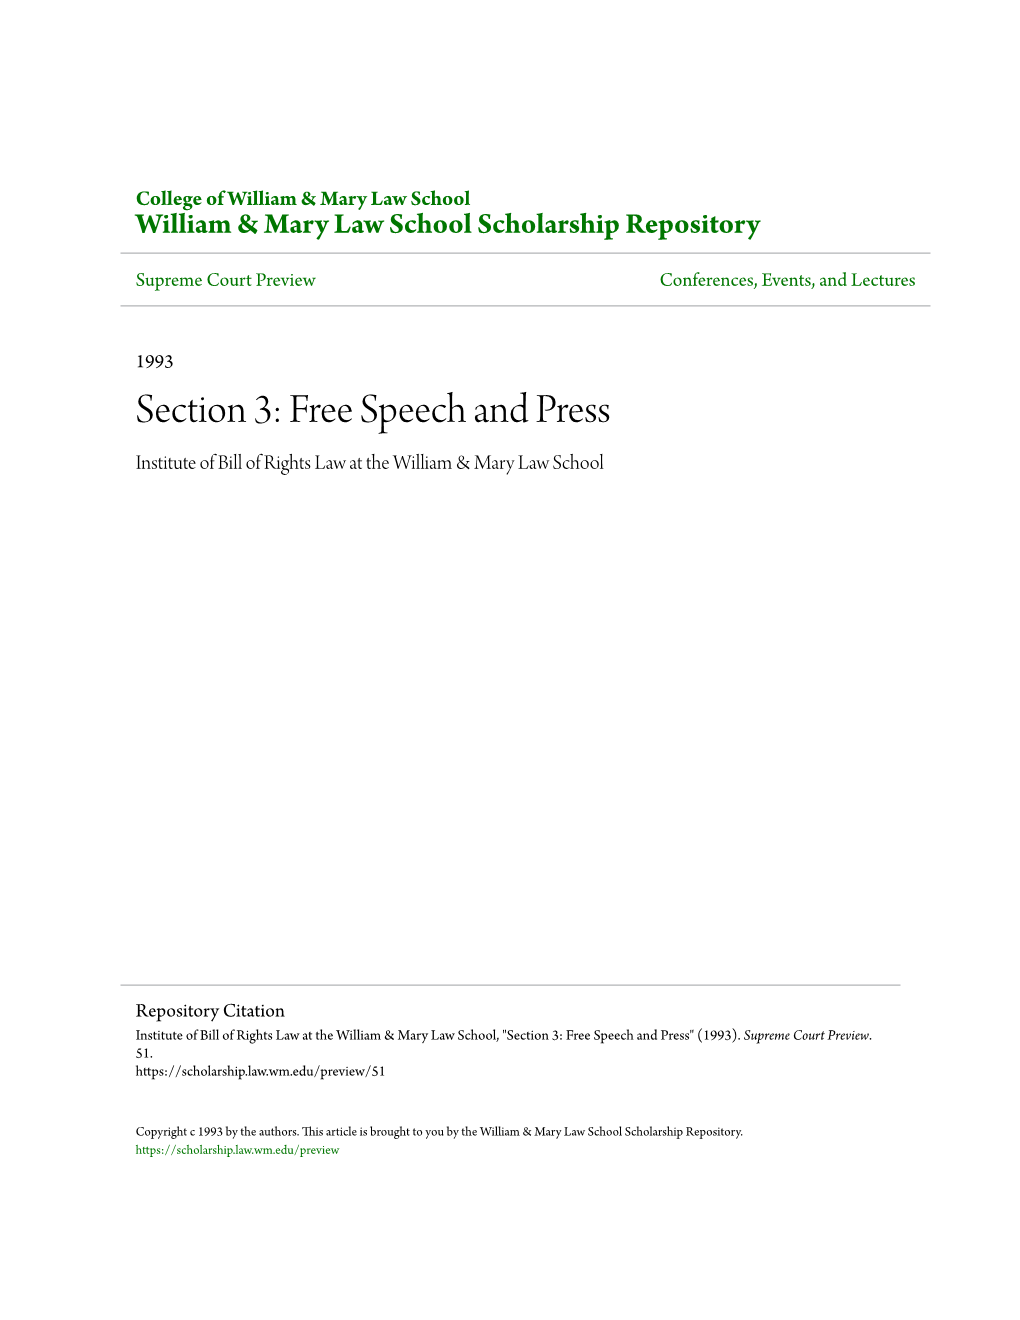 Section 3: Free Speech and Press Institute of Bill of Rights Law at the William & Mary Law School